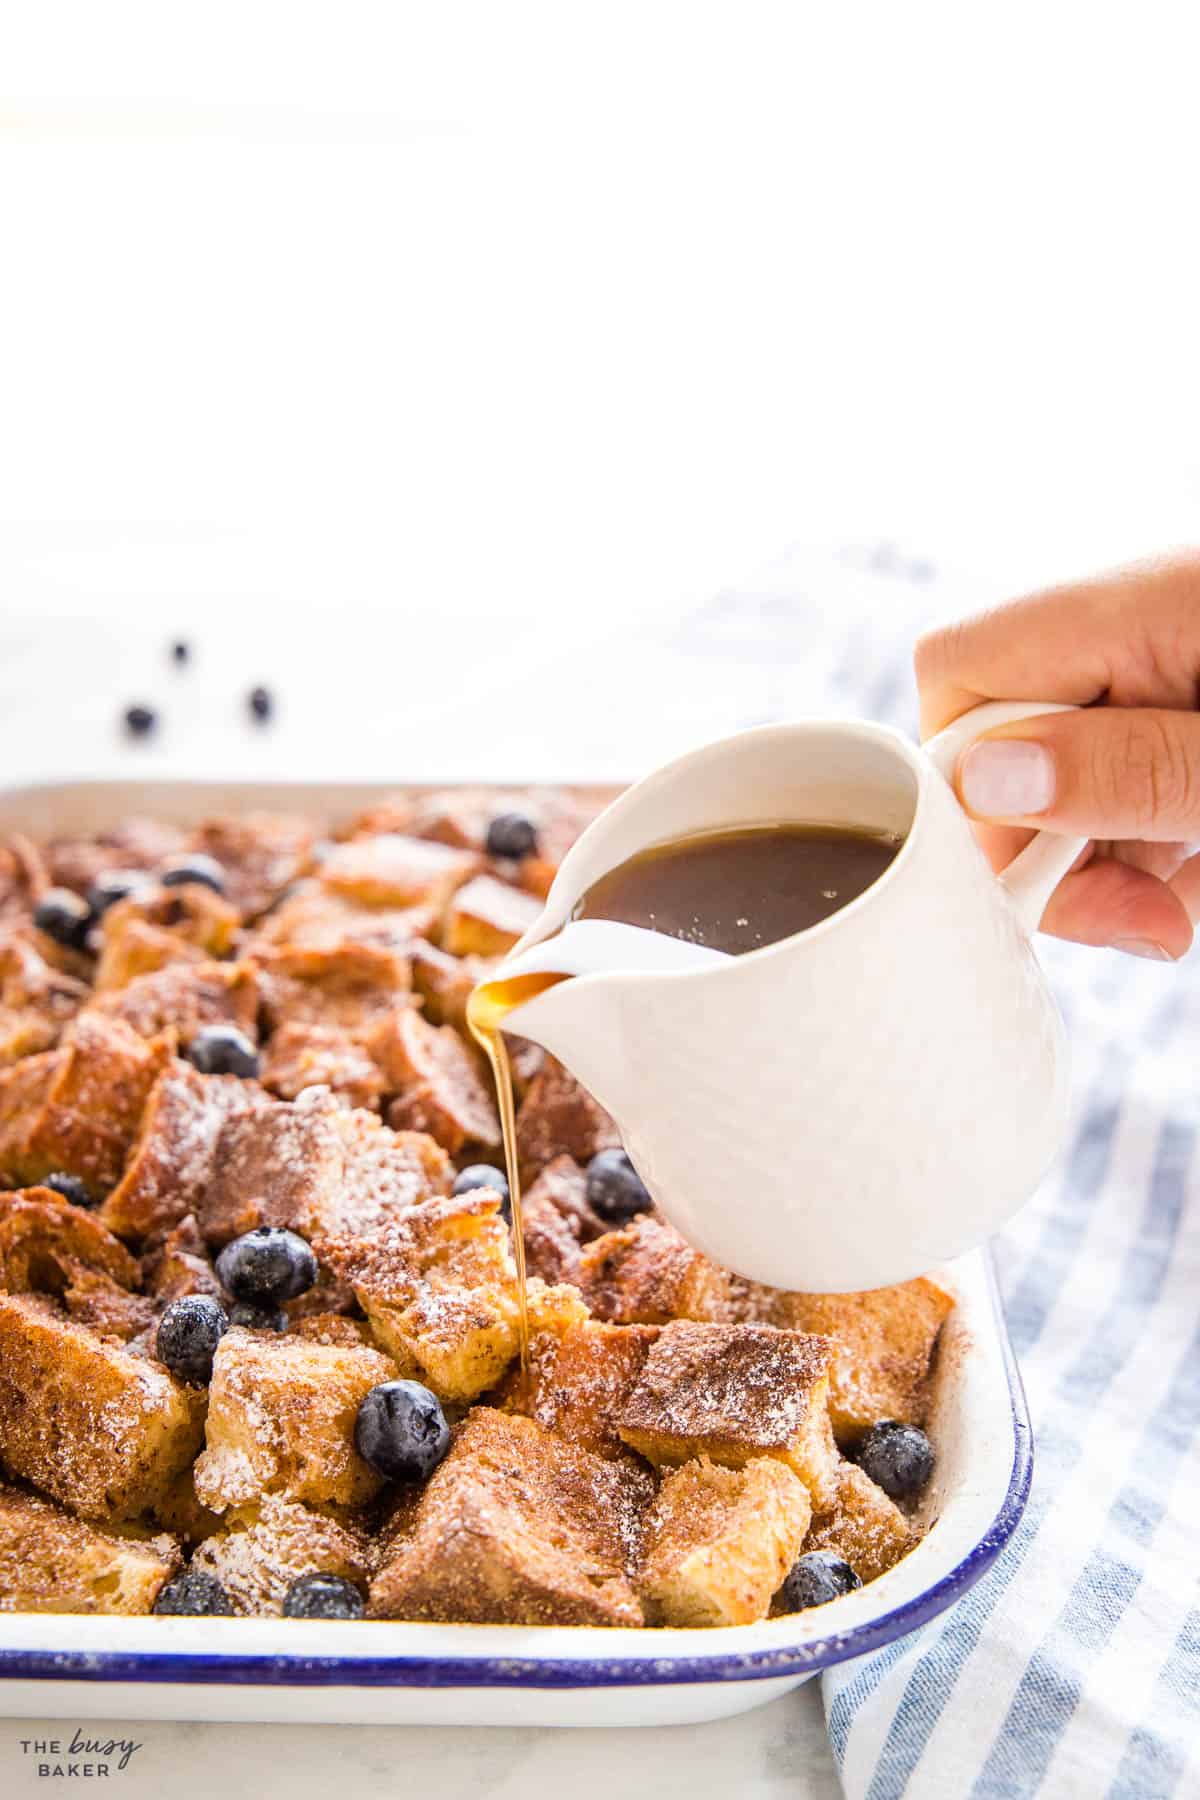 hand pouring syrup on french toast casserole in a white baking pan with blue rim